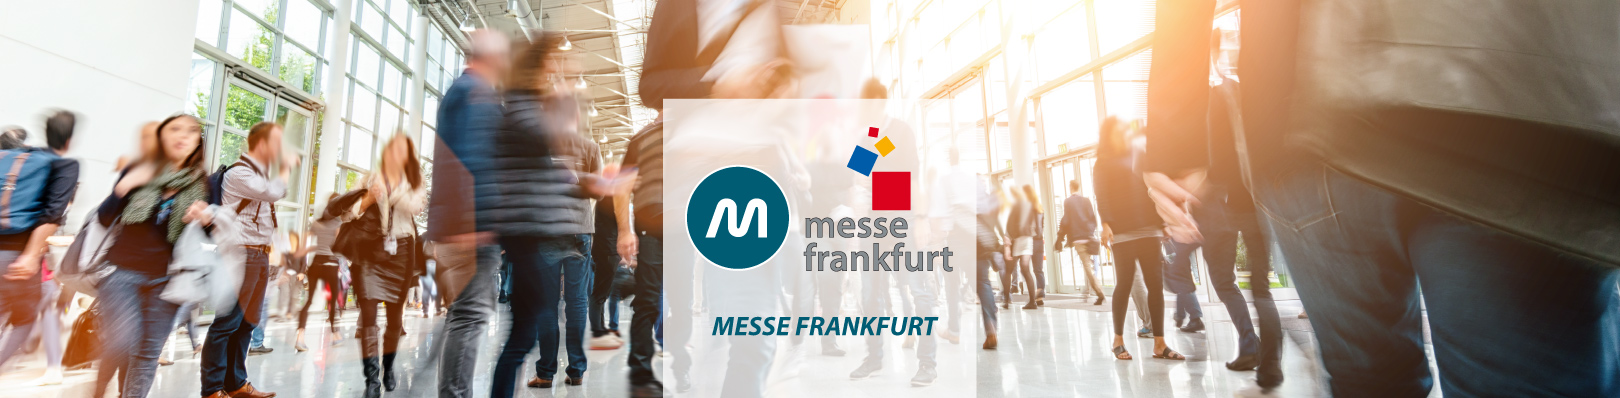 Messe frankfurt page banner on hmi-ad | HMI GmbH is the best promotional gift items supplier for Messe Frankfurt